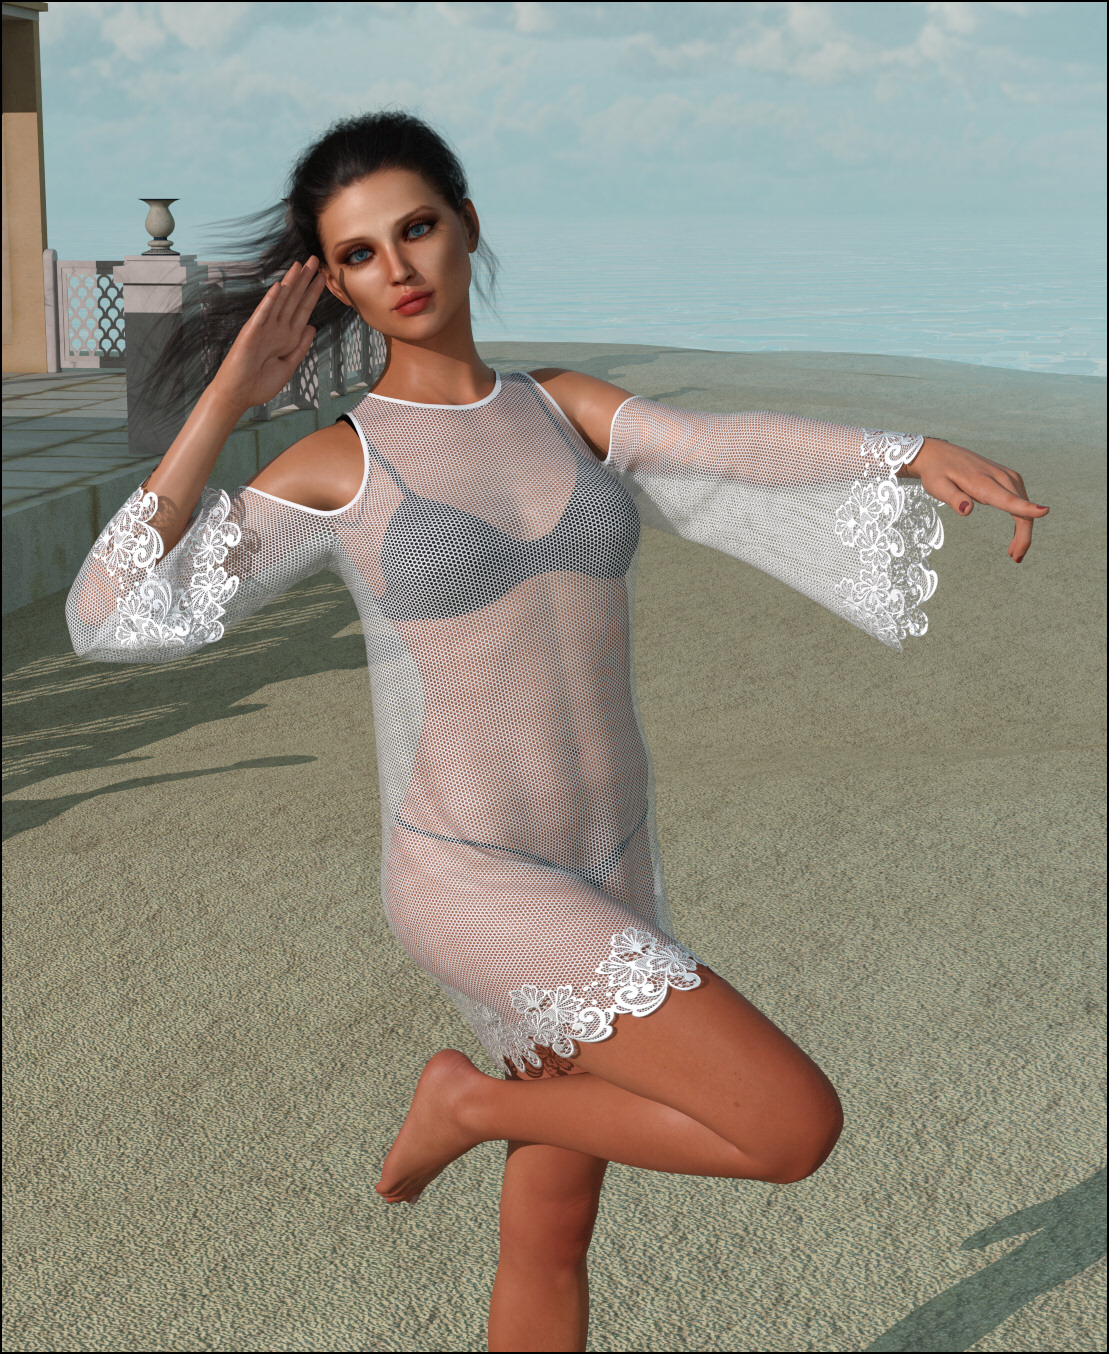 dForce - Beach Dress for G8F by: Lully, 3D Models by Daz 3D